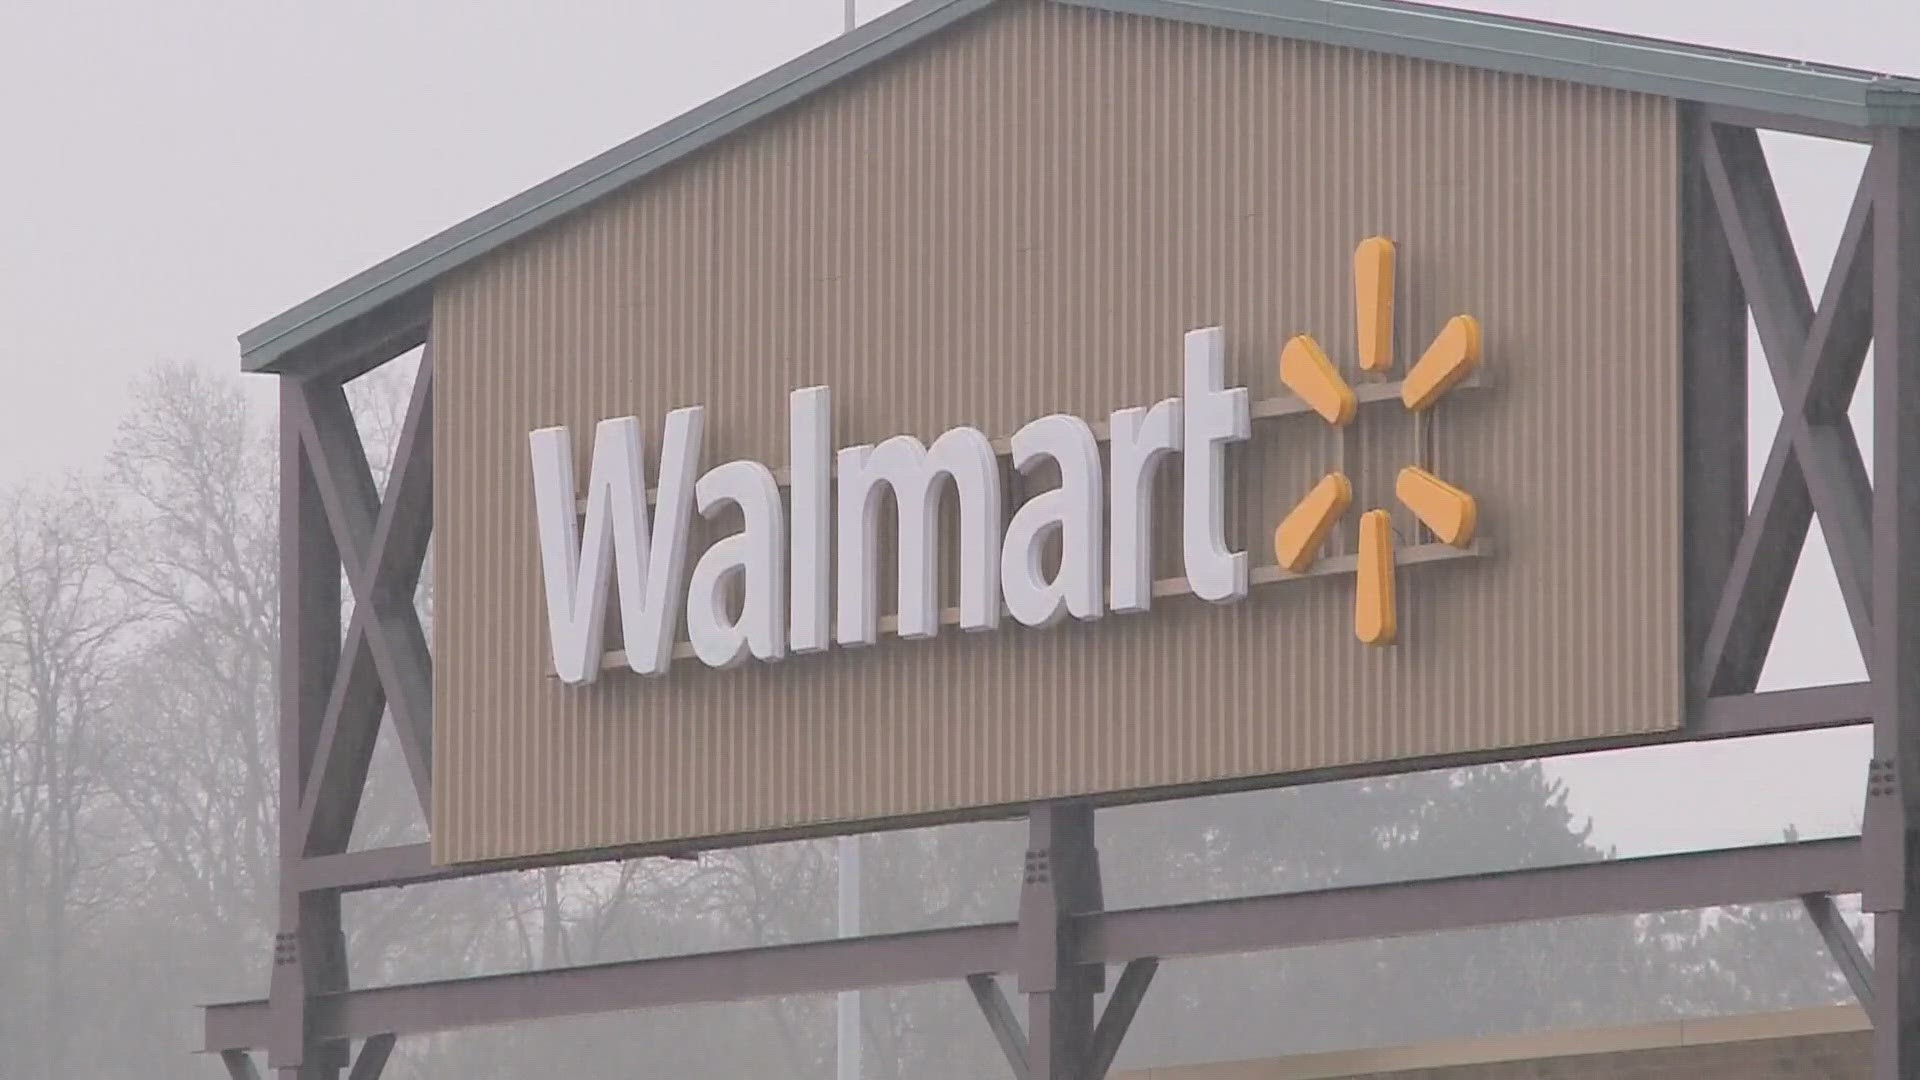 Walmart has confirmed its Steelyard Commons location in Cleveland will be removing all self-checkout lanes from the store starting April 7.